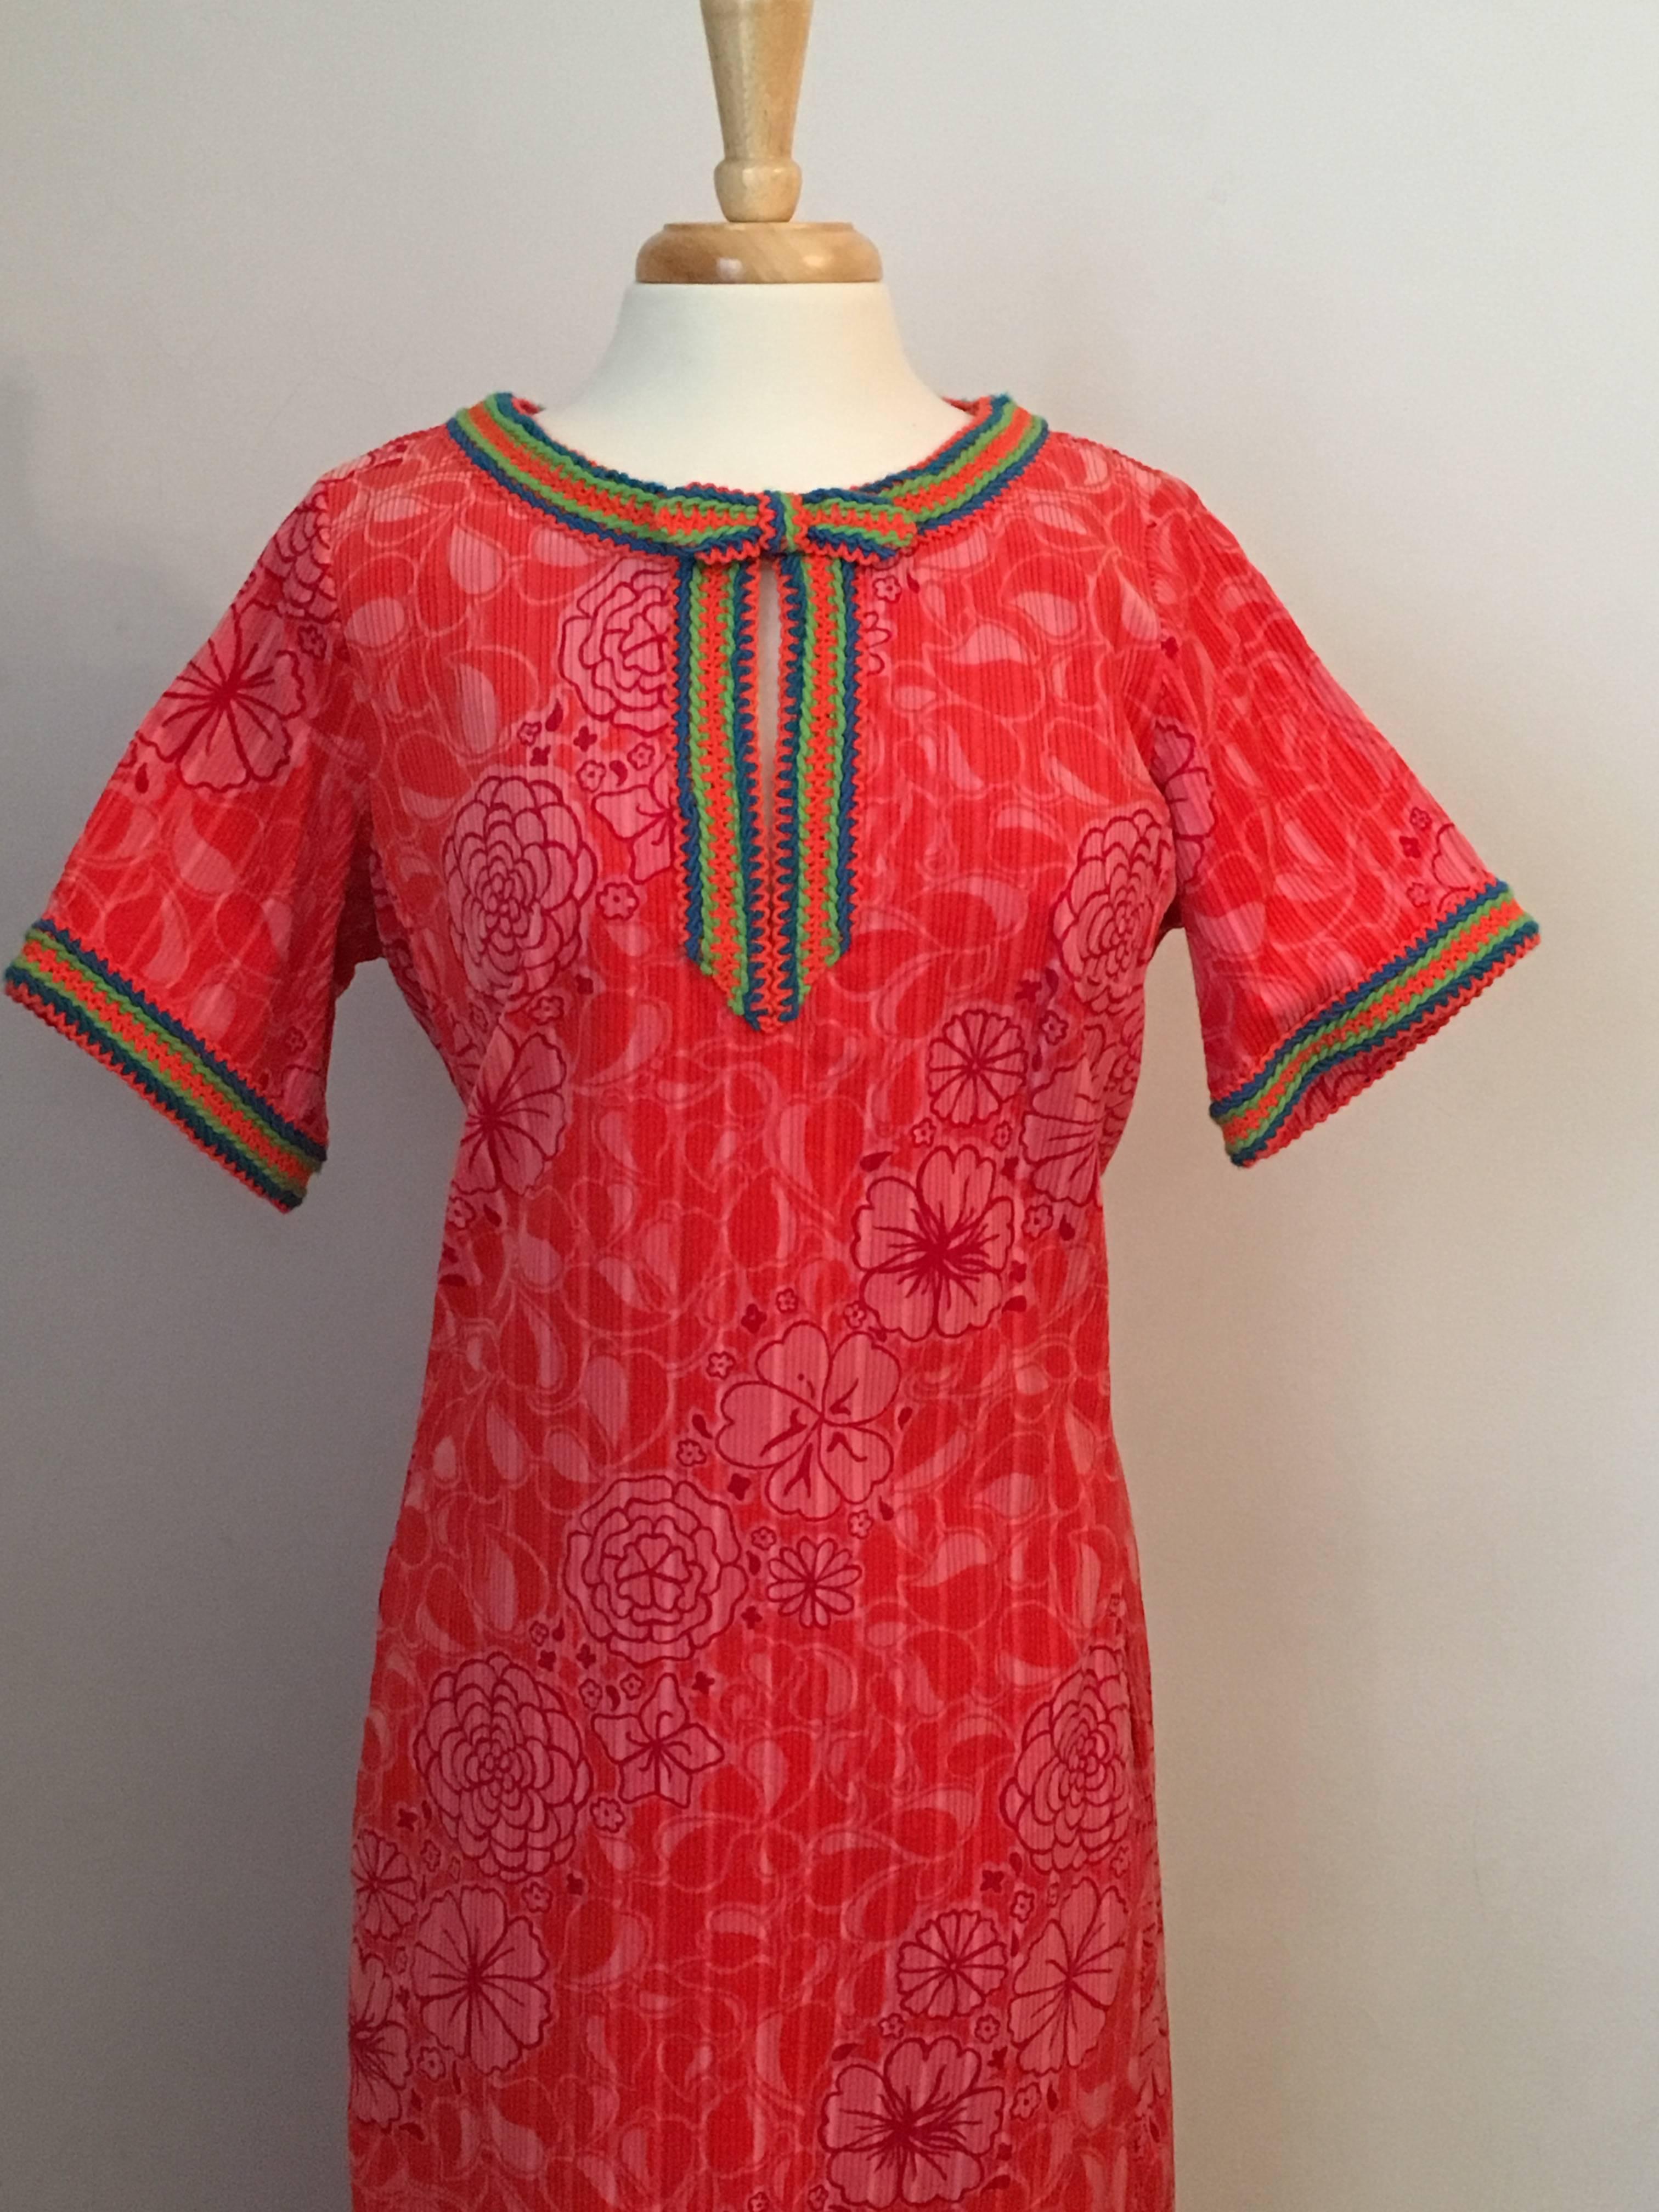 This is a rare Lilly Pulitzer piece from the 1960s. It is a printed corduroy caftan with knit crochet stripe trim. The printed corduroy is pink and orange and the crochet trim is orange, green and blue. I have never seen another one like it. It is